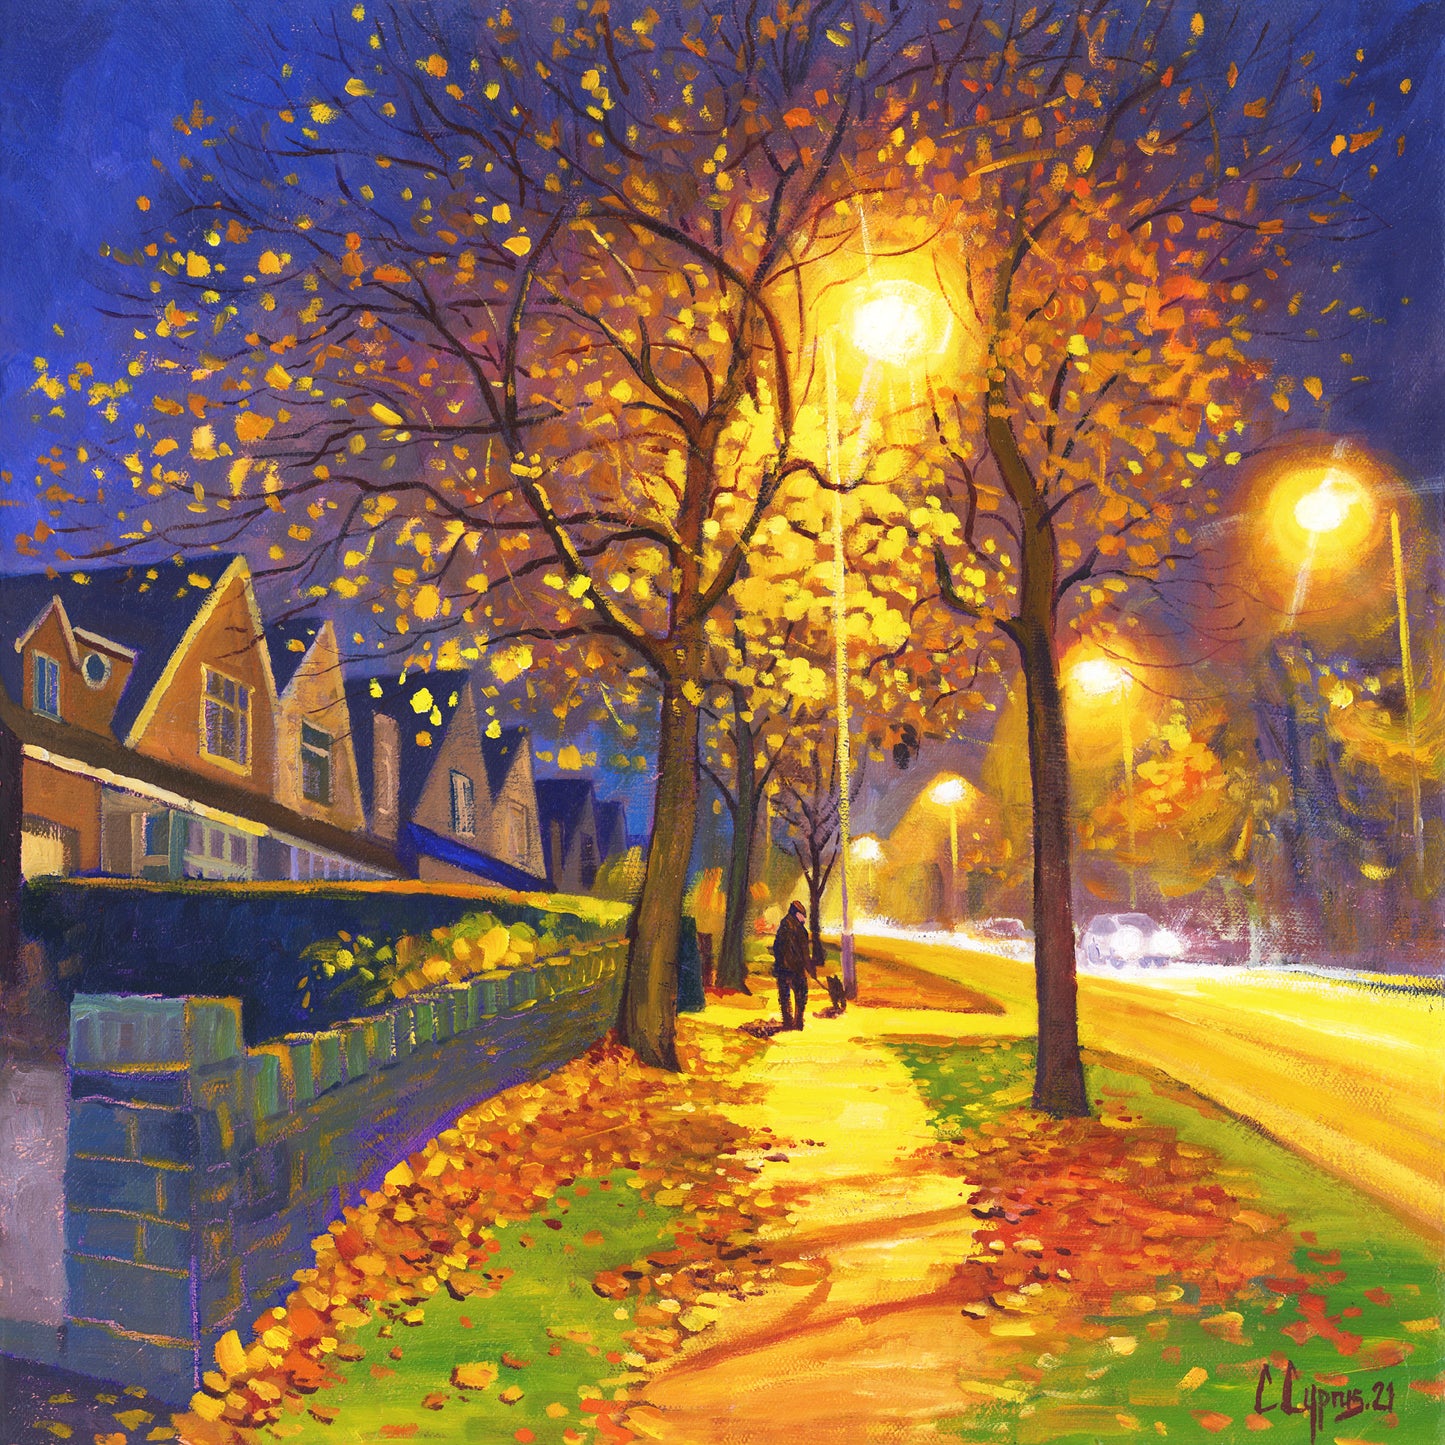 Limited Edition Gicleé Print (tube rolled)  Actual size of artwork 40cm x 40cm  Reproduced from the original painting 'Autumn Evening'  As the nights draw in we begin to appreciate the beauty of sodium lights spreading their warmth!  plus somebody has to take the dog out....     Signed & embossed with a certificate of authentication  Printed on archival paper  Highest quality fade resistant inks used  This product is tube-rolled for worldwide shipping